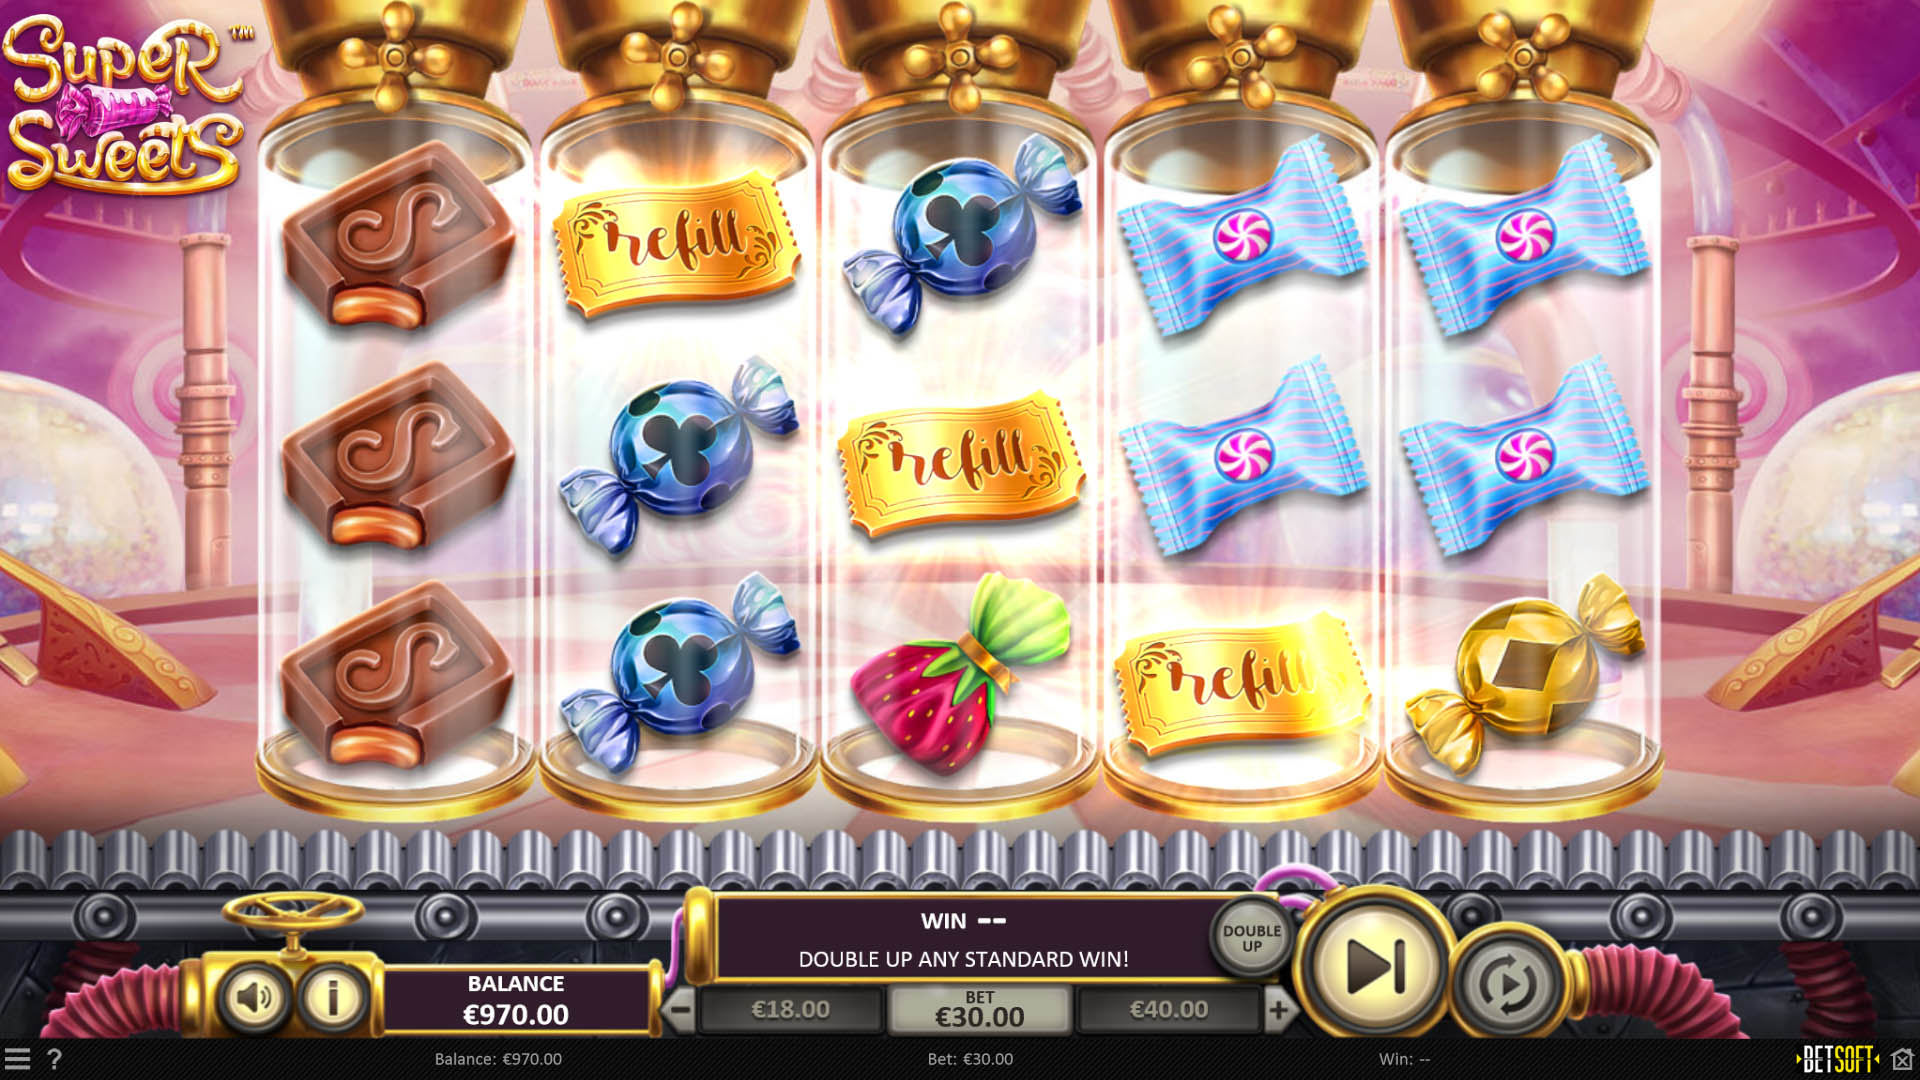 Super Sweets - Golden Ticket Free Spins